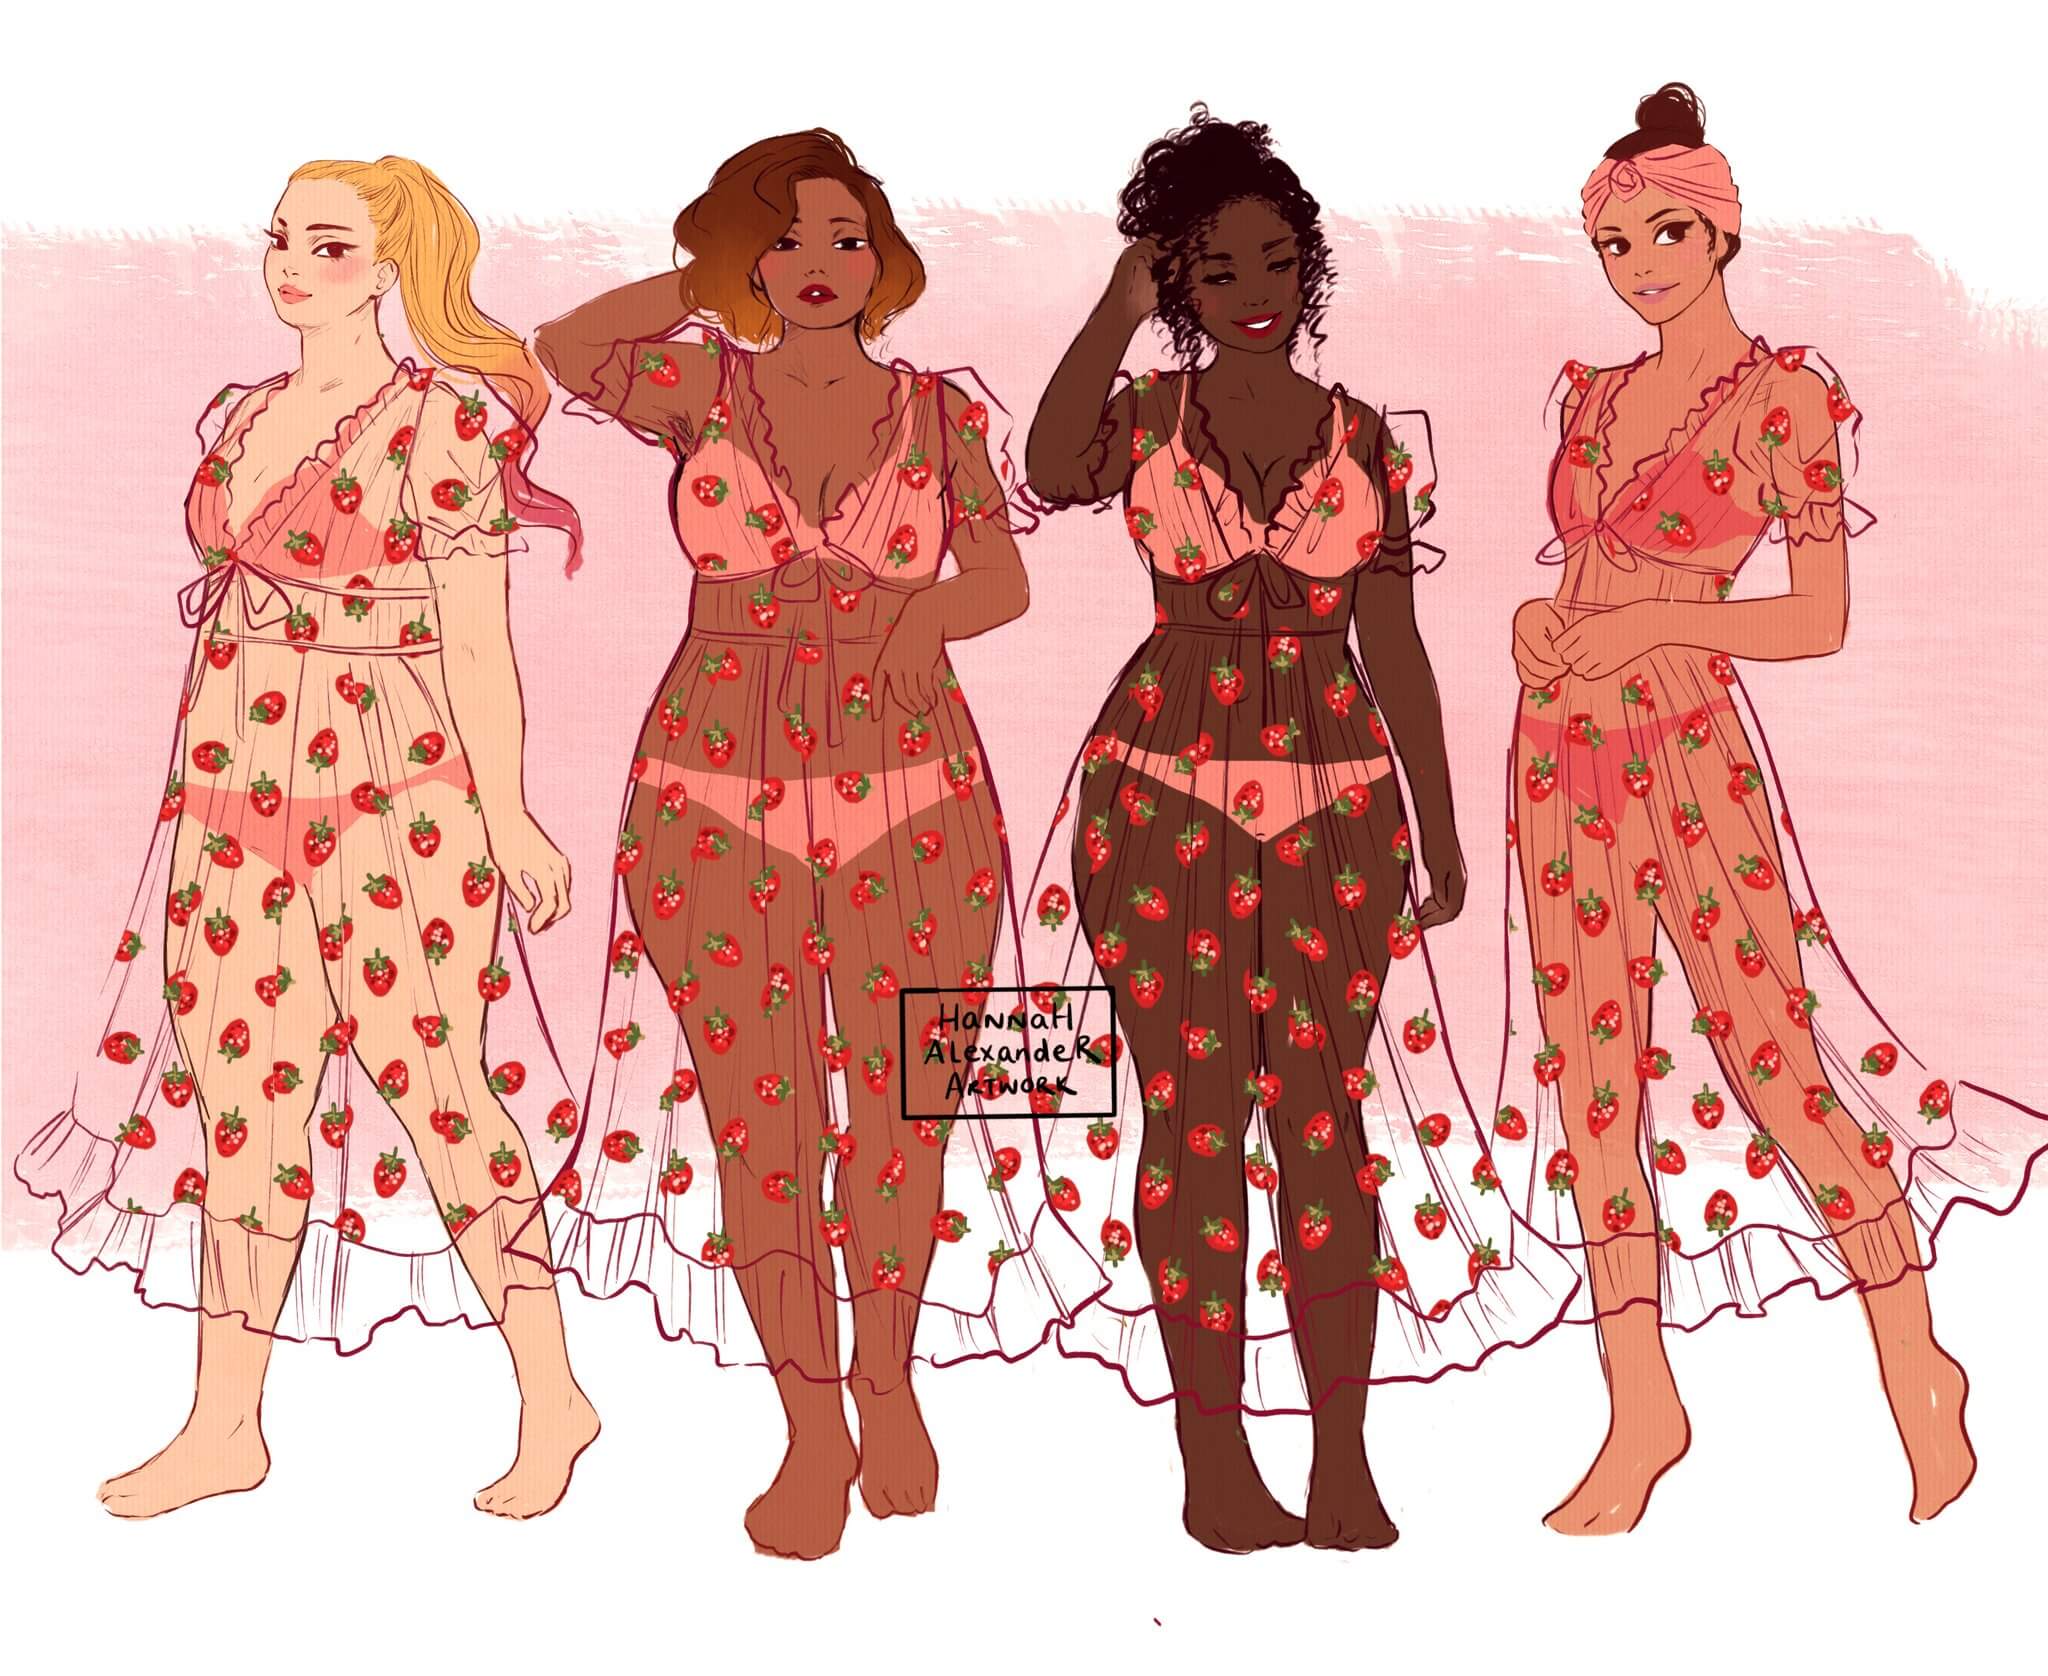 Hey! Hope you are having another amazing week!✨ In the past month, a strawberry dress designed by @lirika.matoshi has been going viral on the Internet and has received tons of praise.🍓 However, Tess Holliday, the plus-size model wore the dress on the red carpet back in January, resulted in some serious backlash from the press and insults from the Internet. It highlighted just how much fatphobia still dominates the fashion world and it’s really frustrating.😔 We are initiating the #wearwhatmakesyouhappy campaign soon, to call for everyone to wear anything they like and show their body confidently, please stay tuned to our official Instagram page @wooplus_dating 👈 Share your opinions in the comments as well!👇